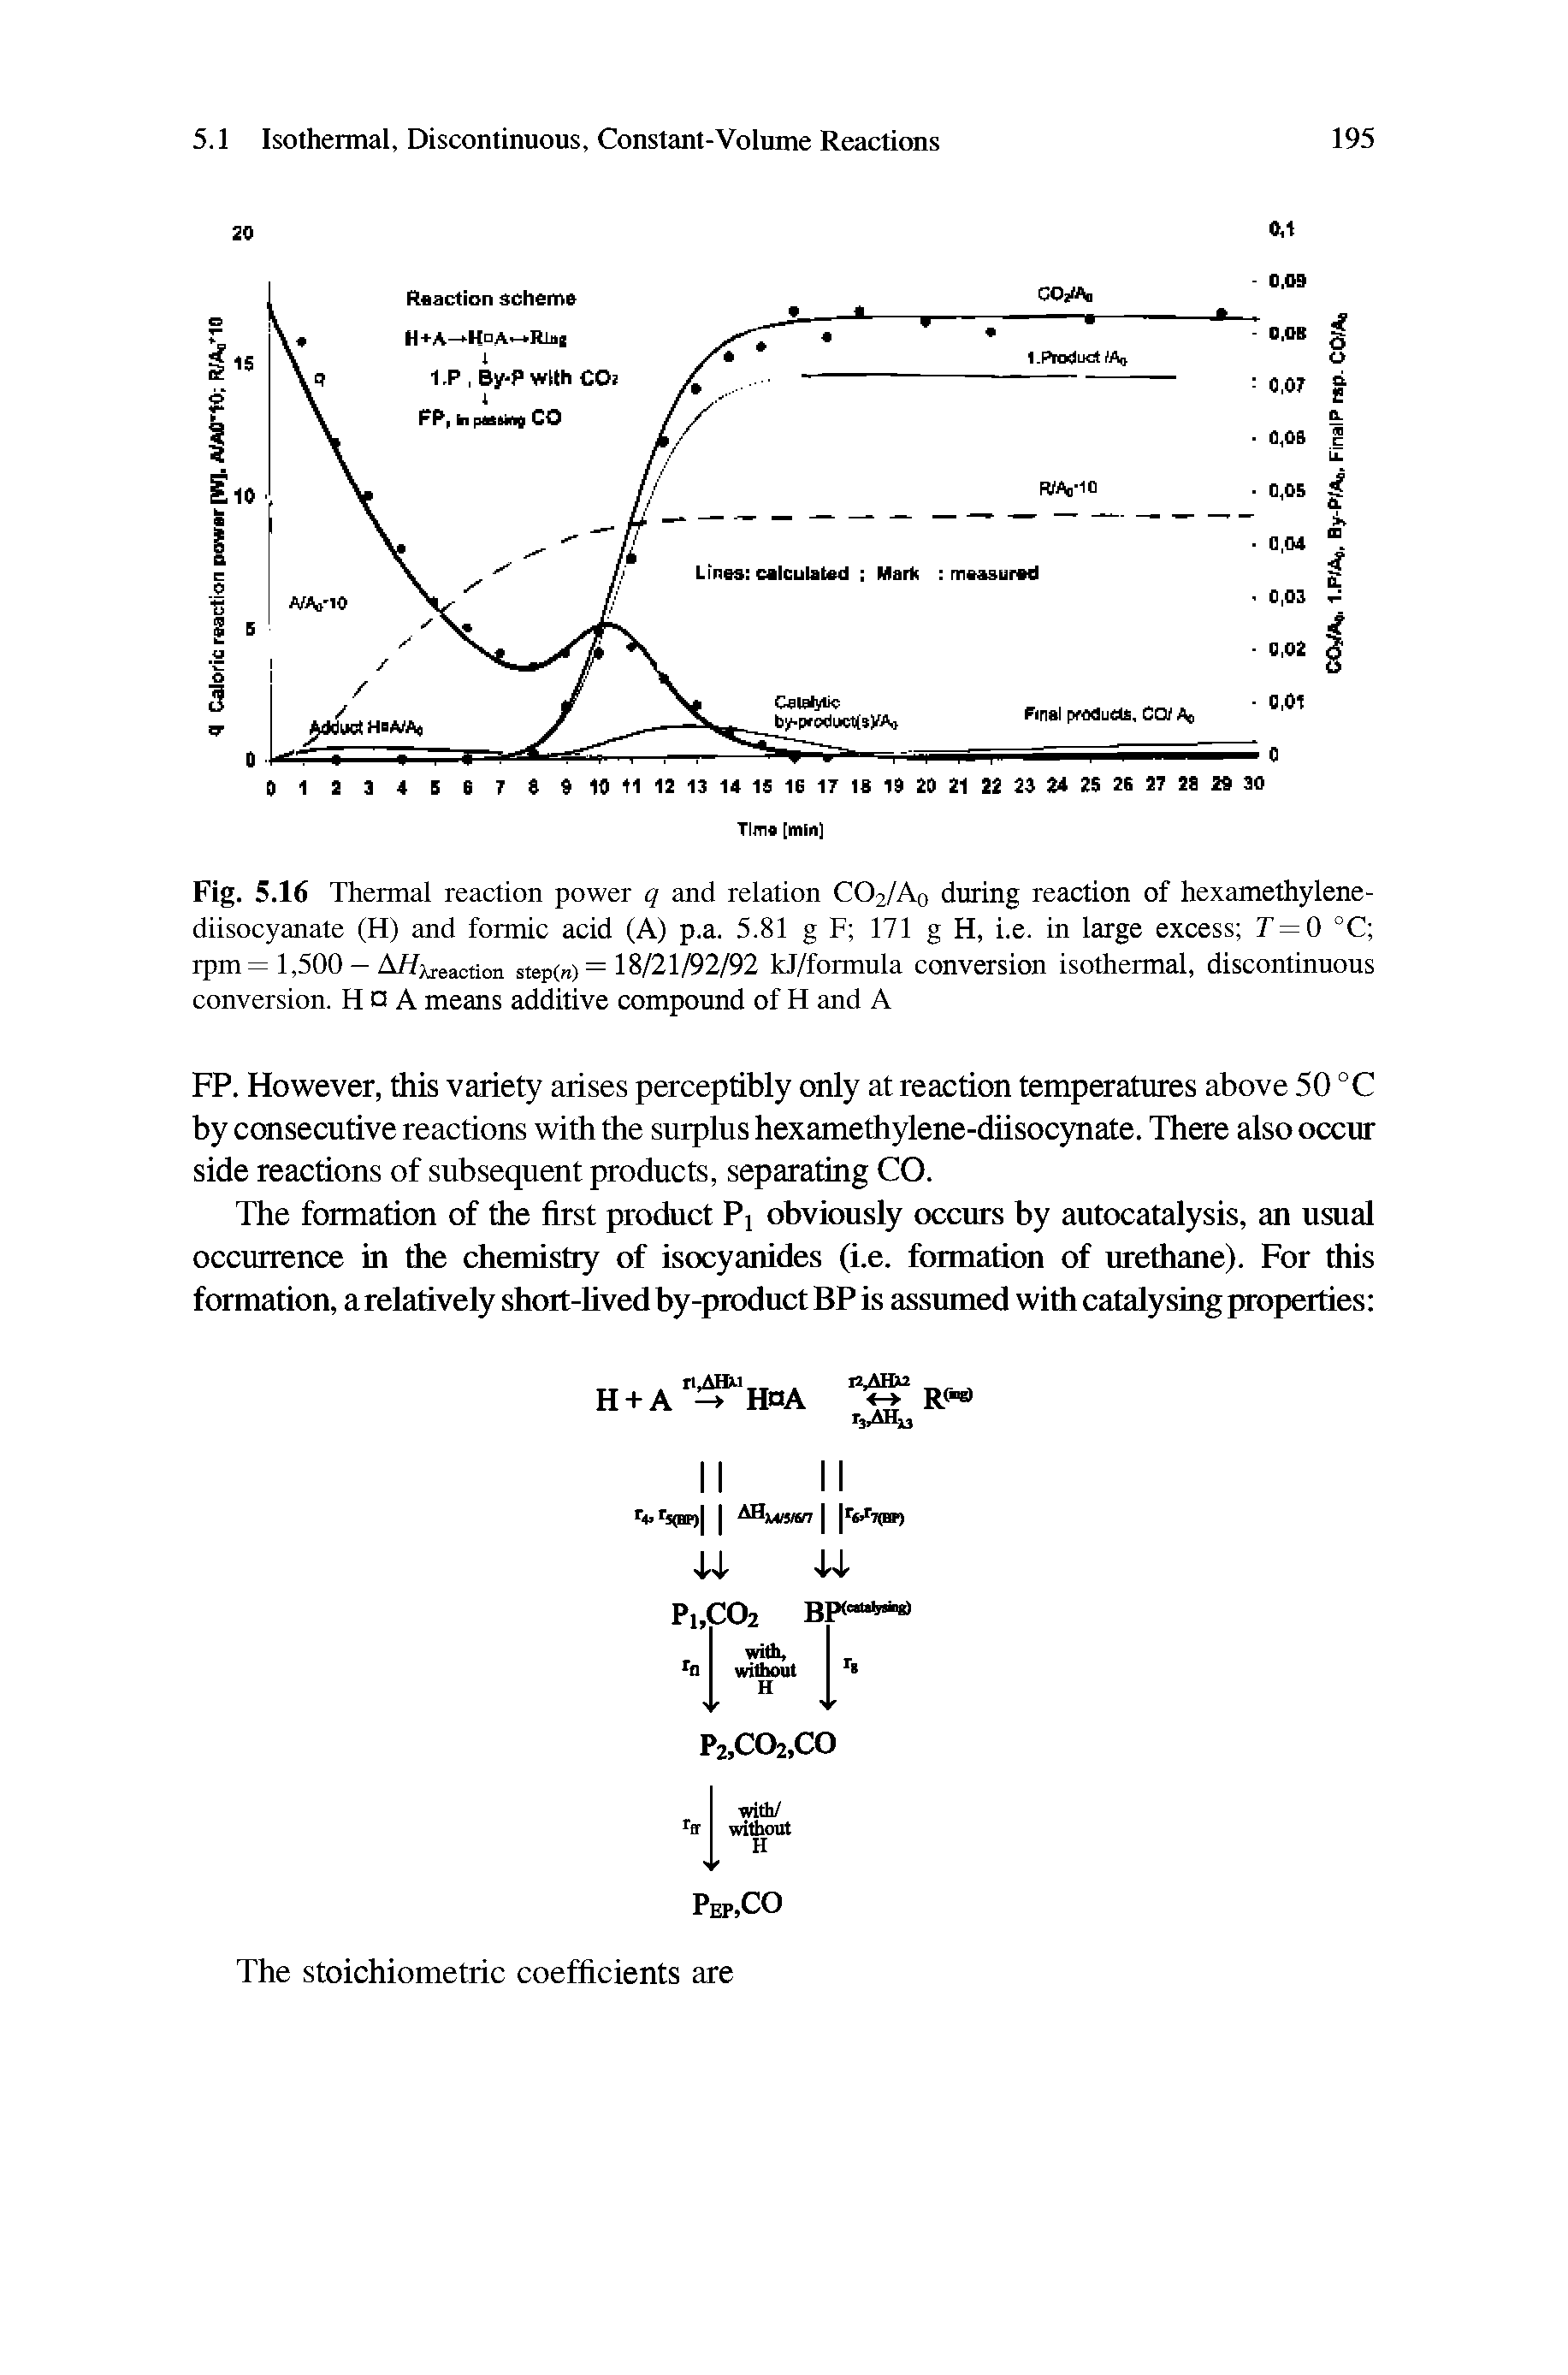 Fig. 5.16 Thermal reaction power q and relation CO2/A0 during reaction of hexamethylene-diisocyanate (H) and formic acid (A) p.a. 5.81 g F 171 g H, i.e. in large excess T = 0 °C rpm= 1,500 — A/fxreaotion step(n) = 18/21/92/92 kJ/formula conversion isothermal, discontinuous conversion. H Q A means additive compound of H and A...